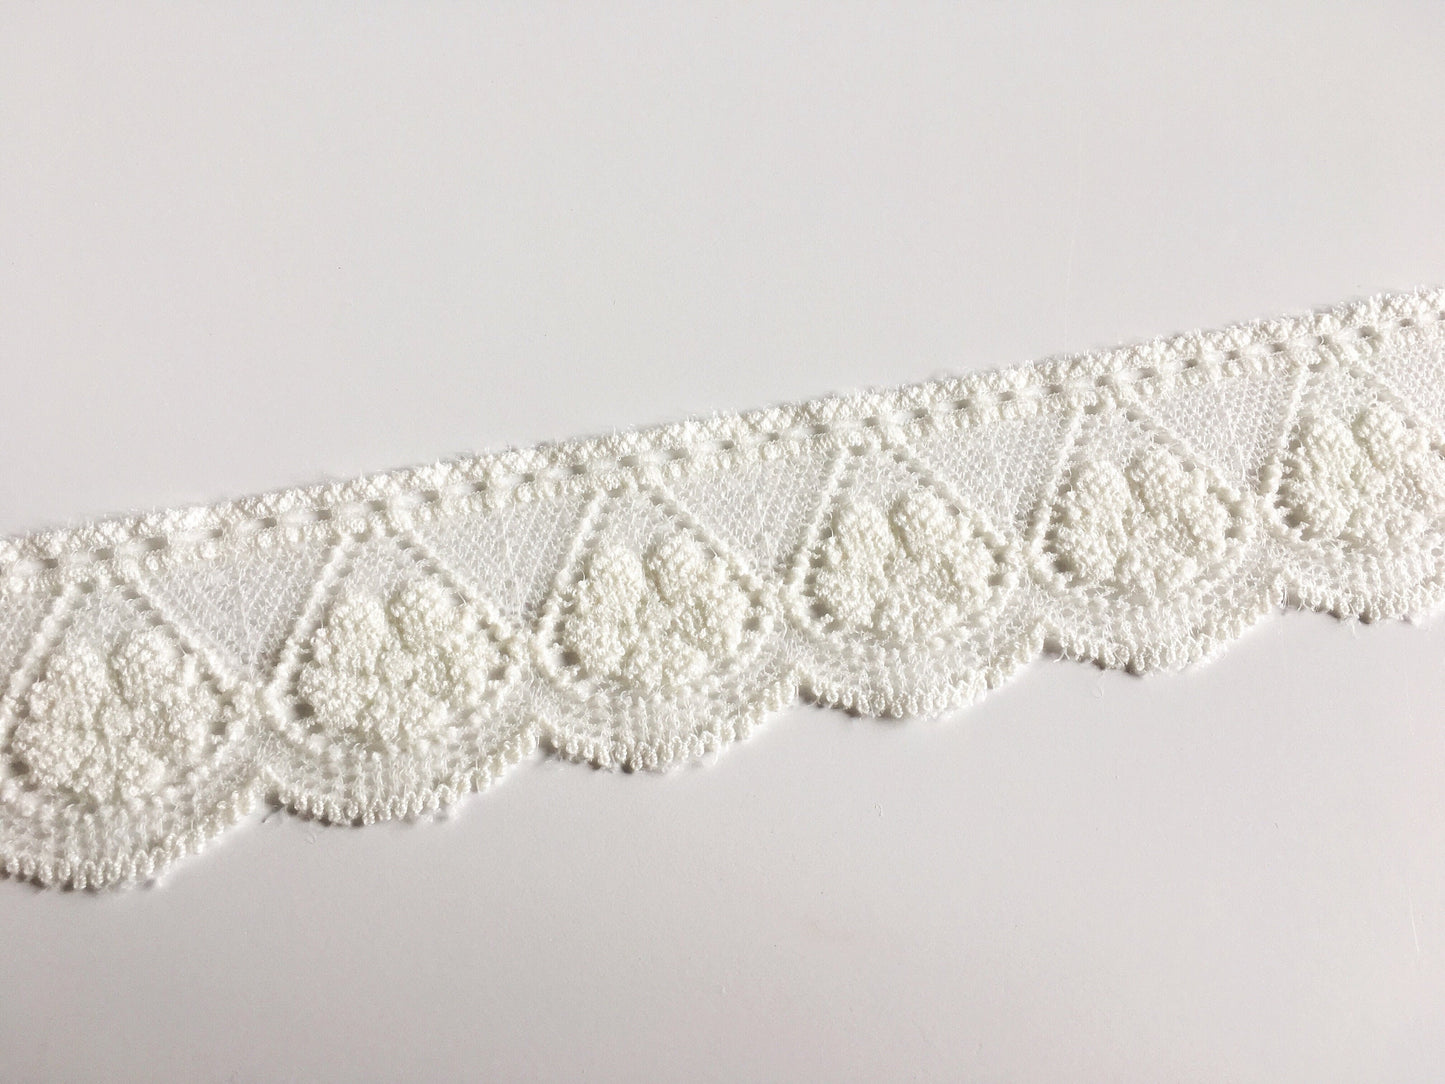 Stretch Lace Trim with Floral Pattern | 3.5cm wide available in a choice of colours | Lingerie Sewing Supplies | Price per metre